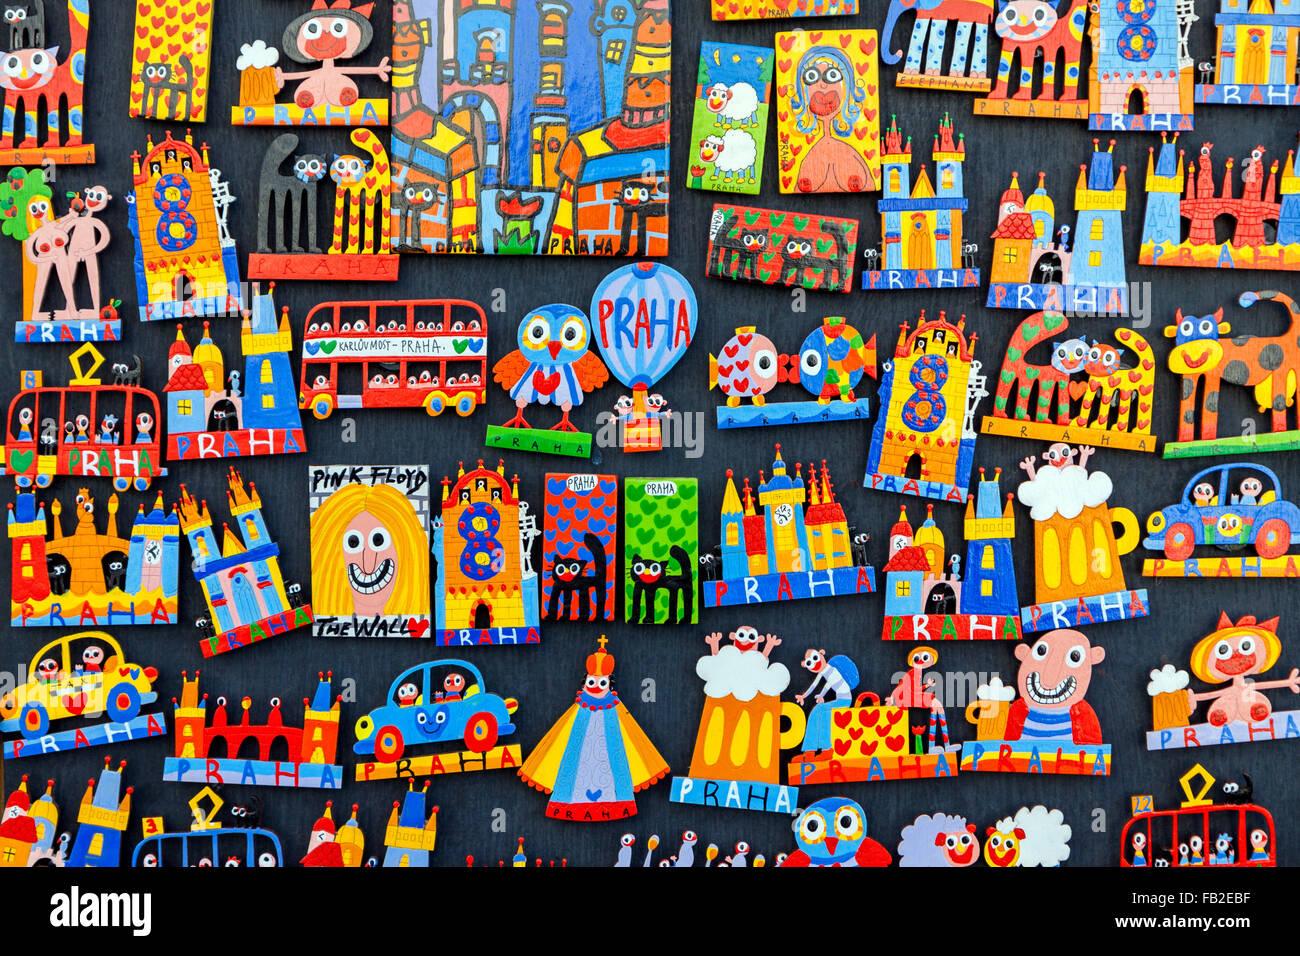 Traditional wooden colorful souvenir magnets on display in Prague, Czech Republic Stock Photo